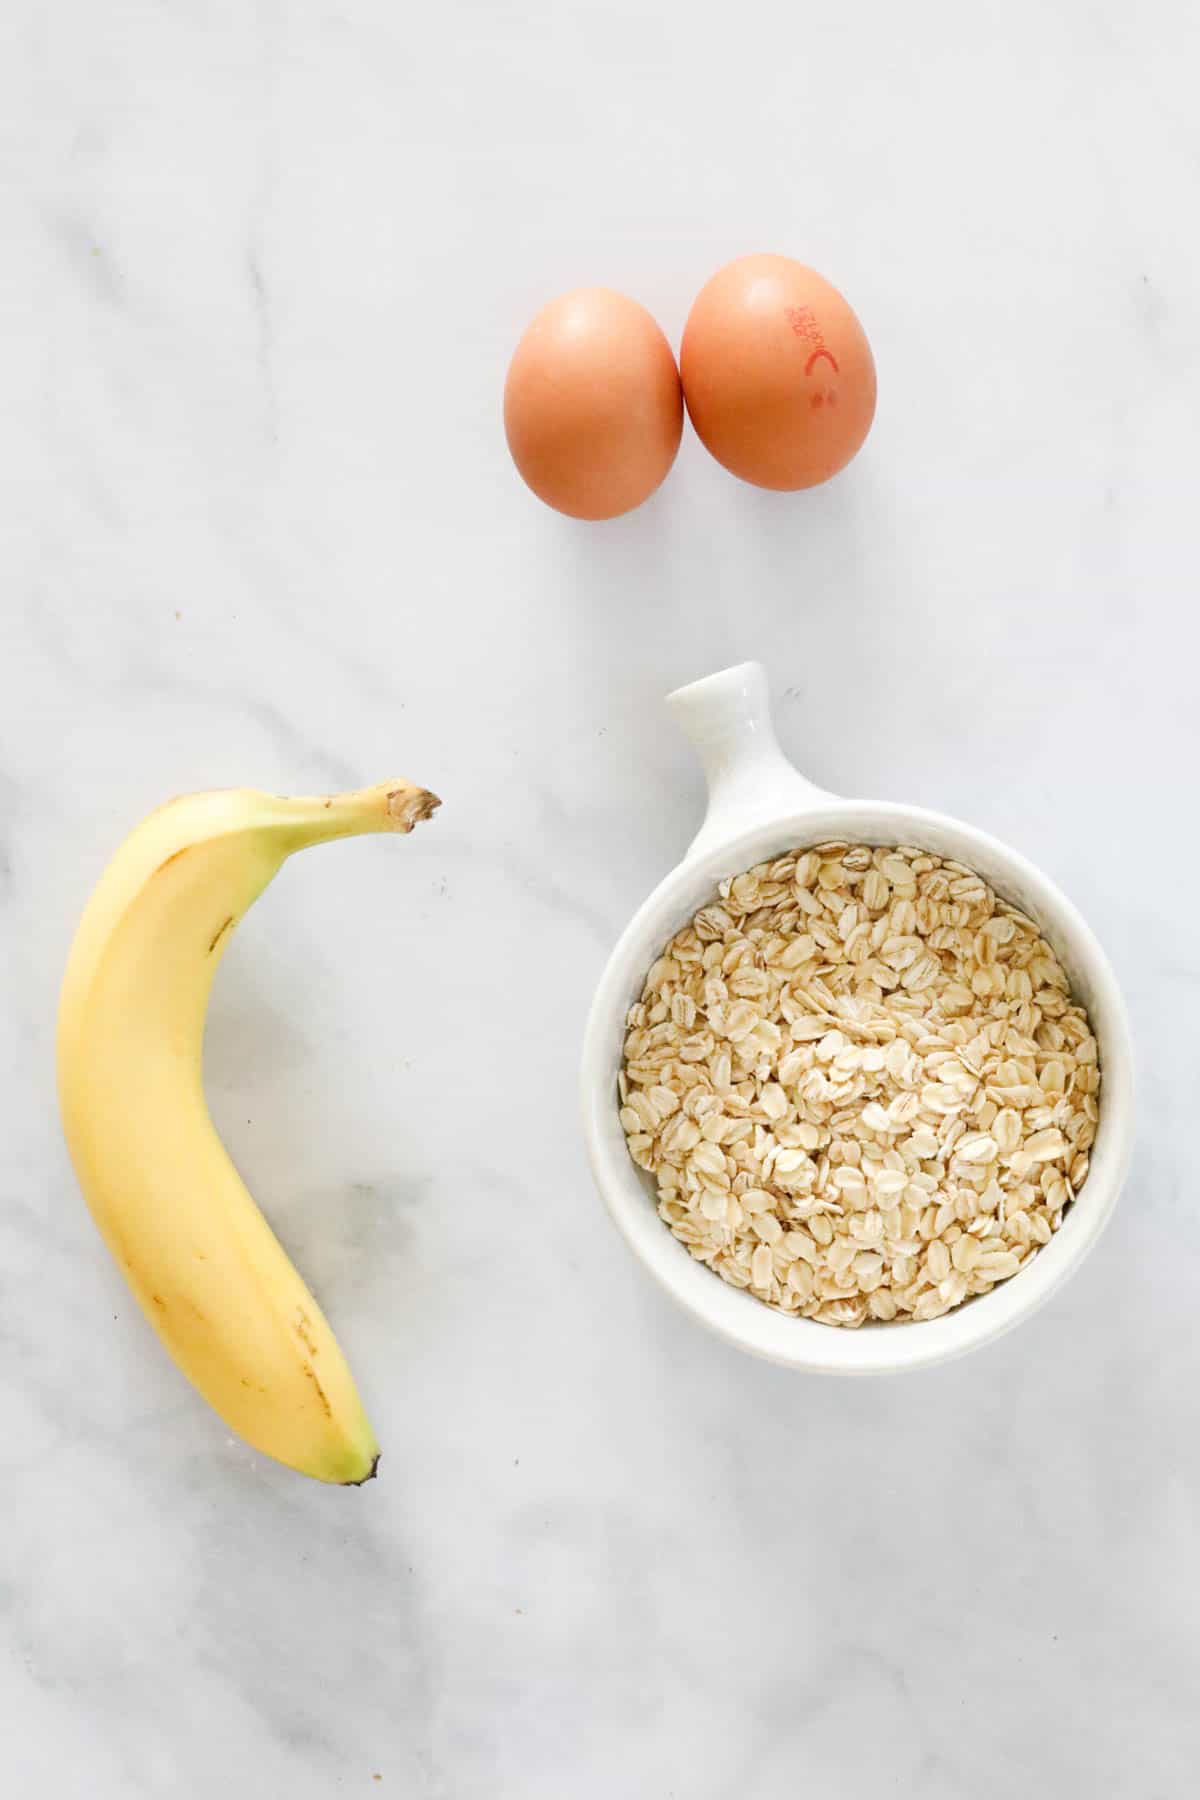 The ingredients needed to make the recipe: 2 eggs, a bowl of oats and a banana.